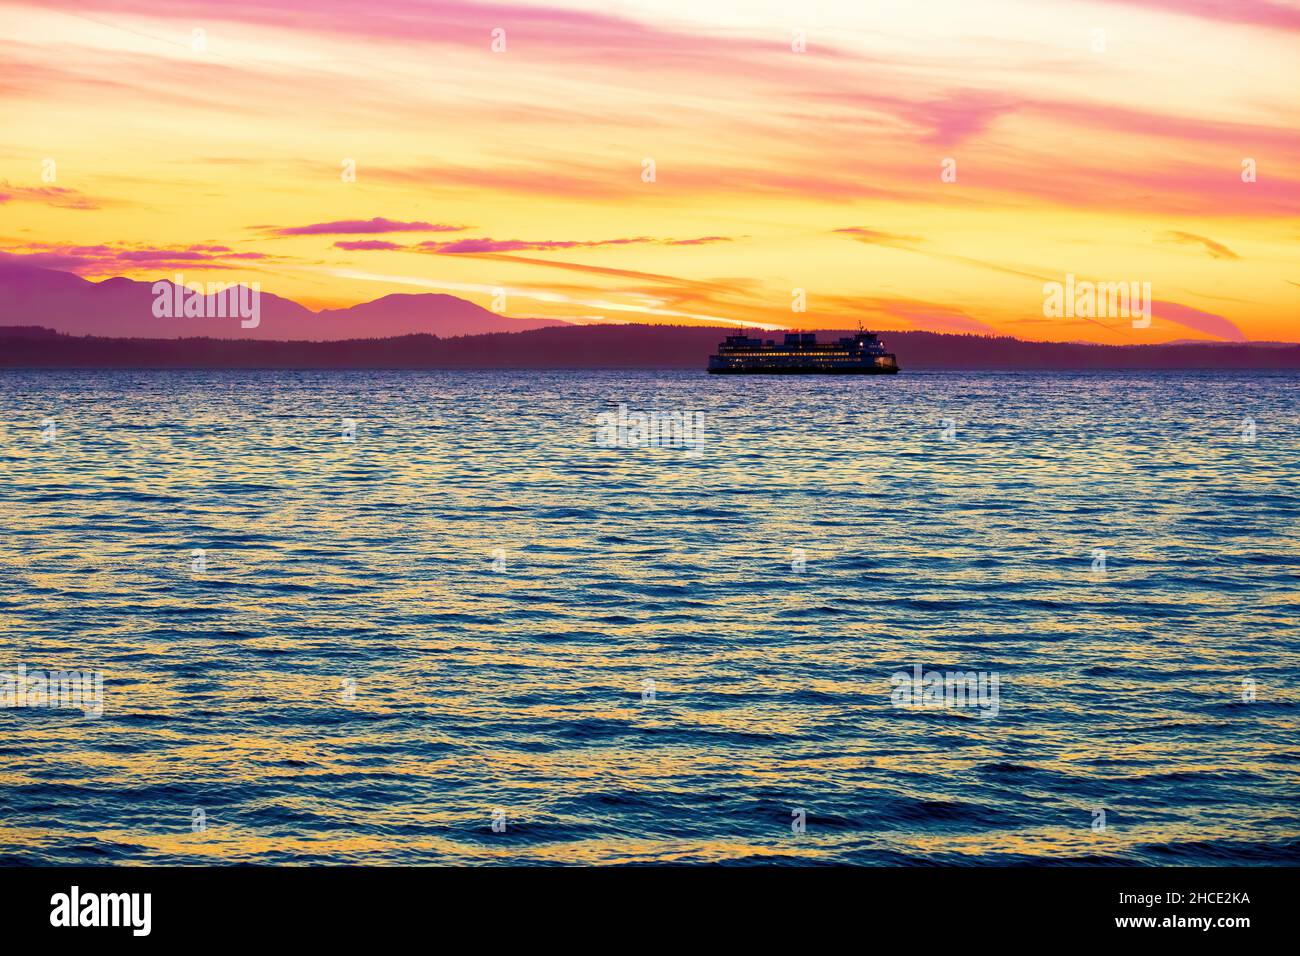 Large ferry boat sailing across water at sunset Stock Photo